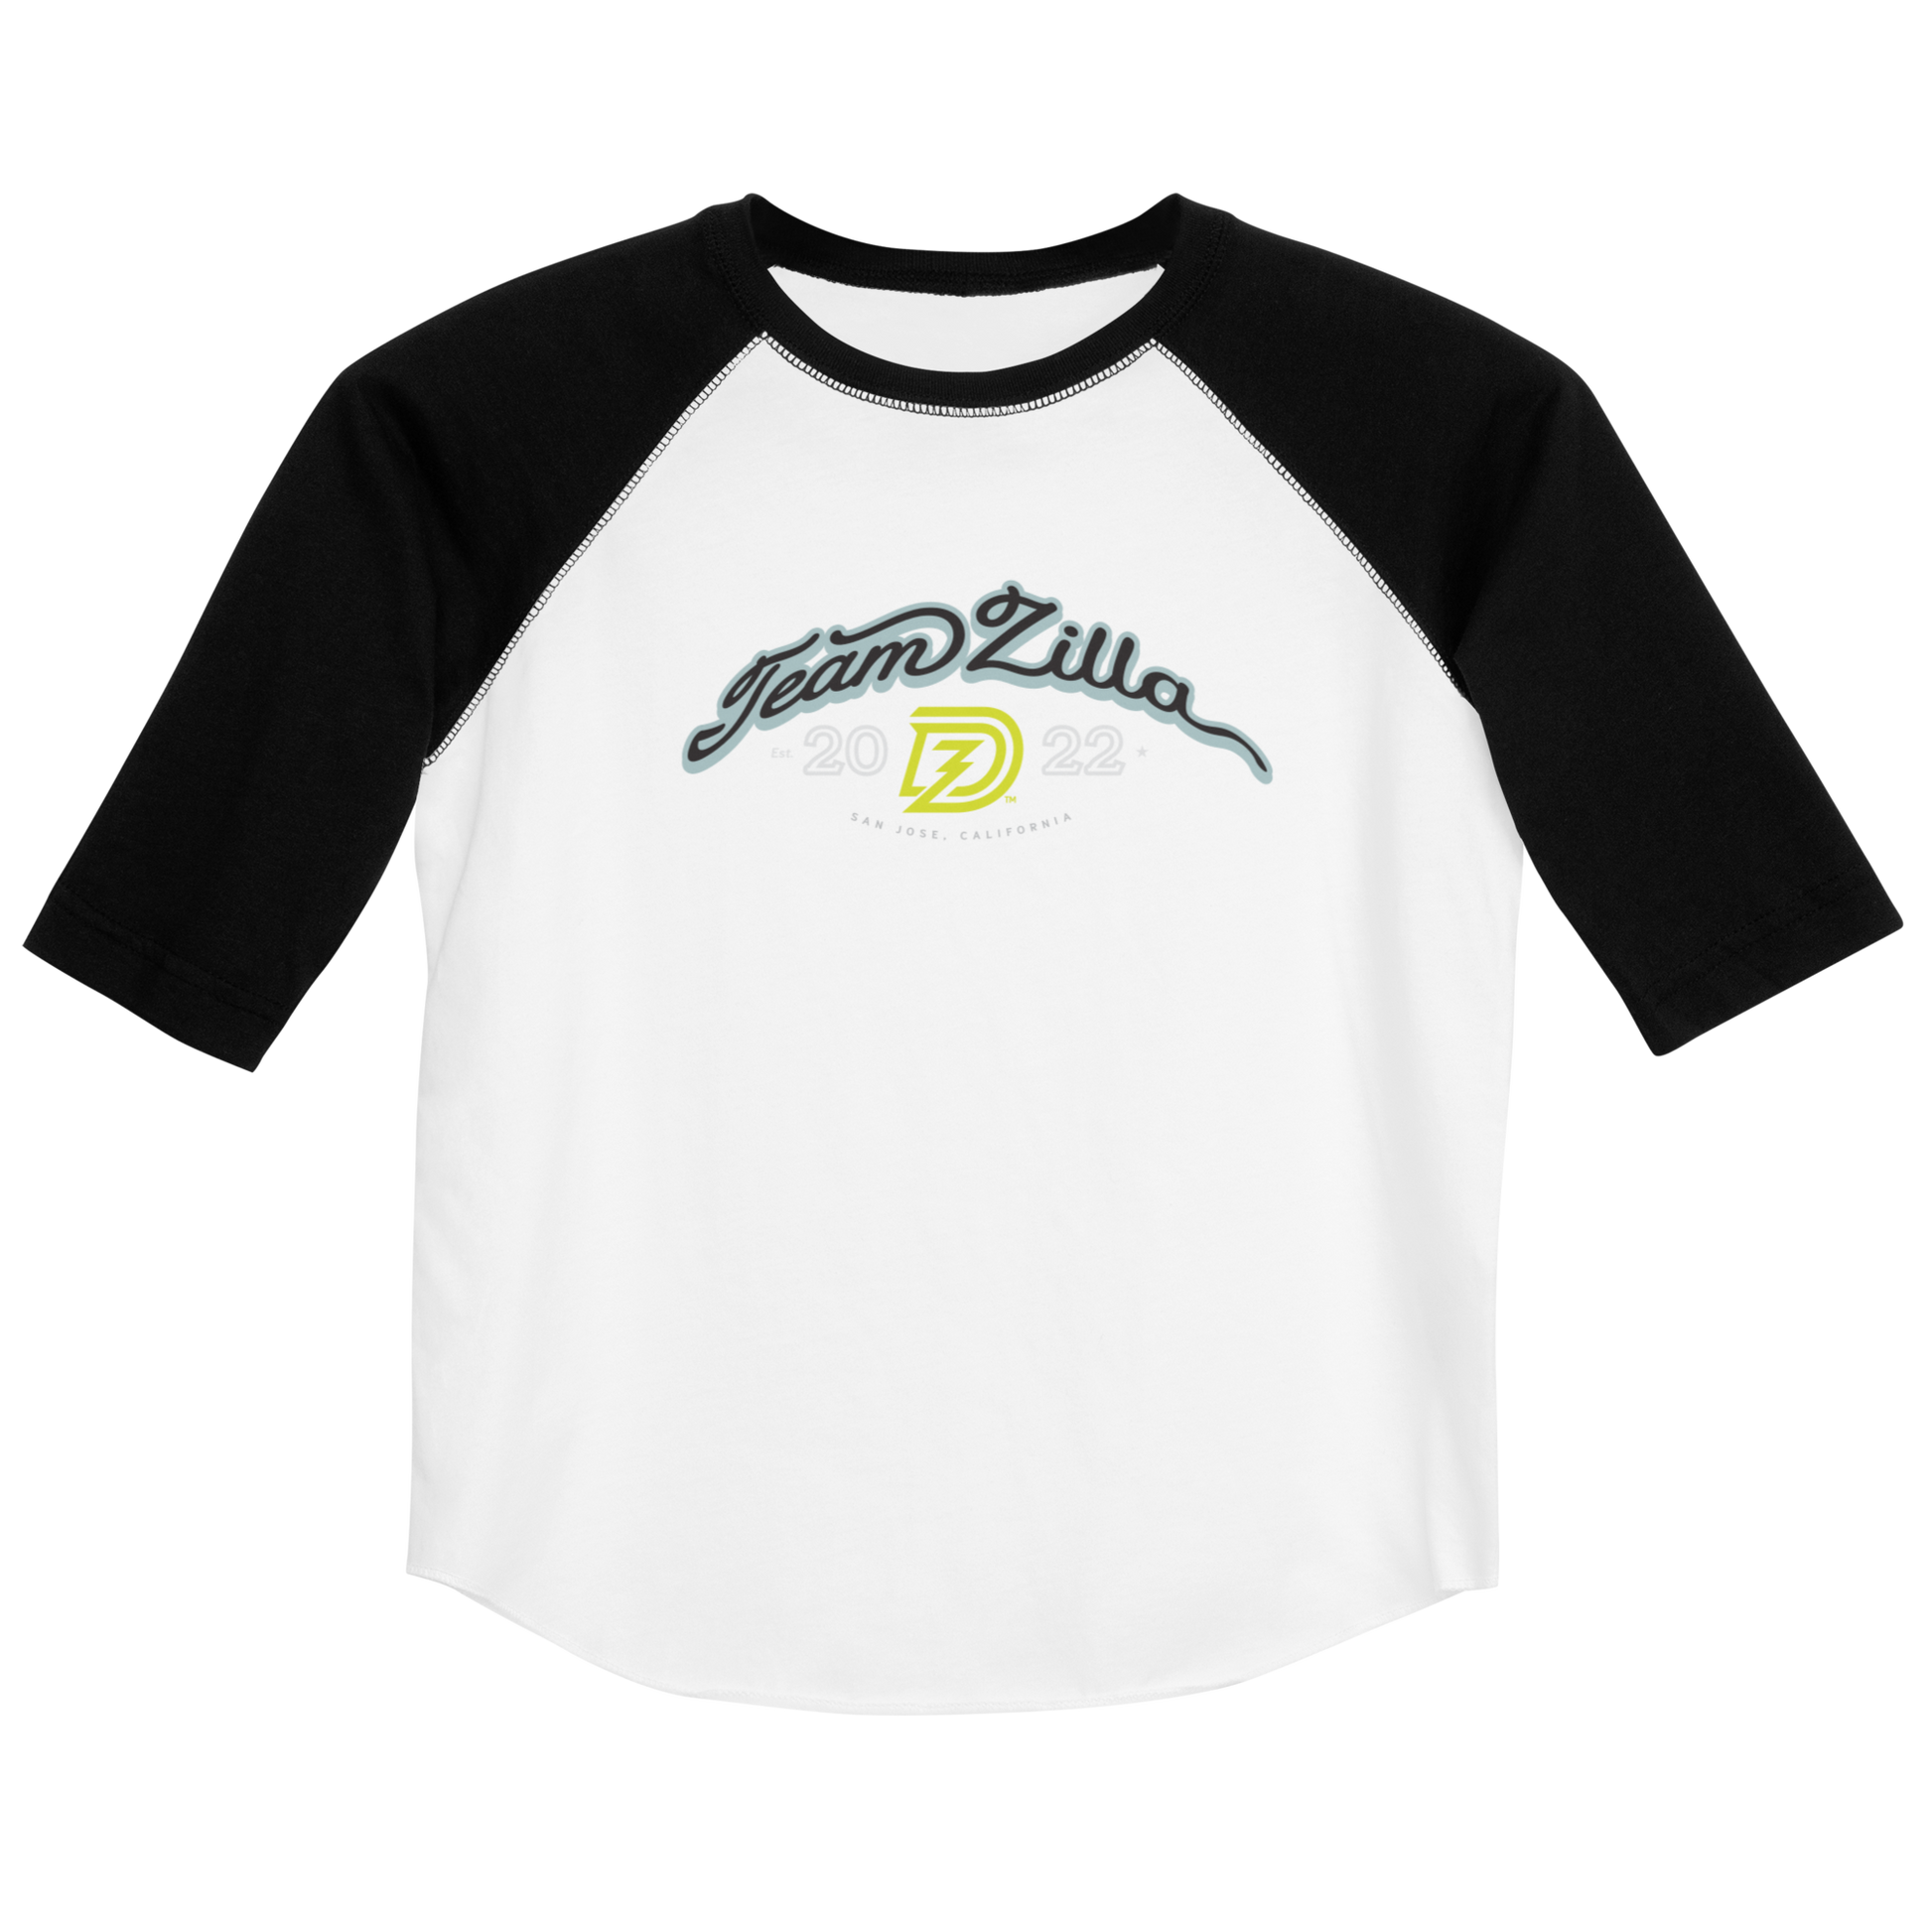 Team Zilla 2022 Youth Shirt in White with Black Sleeves